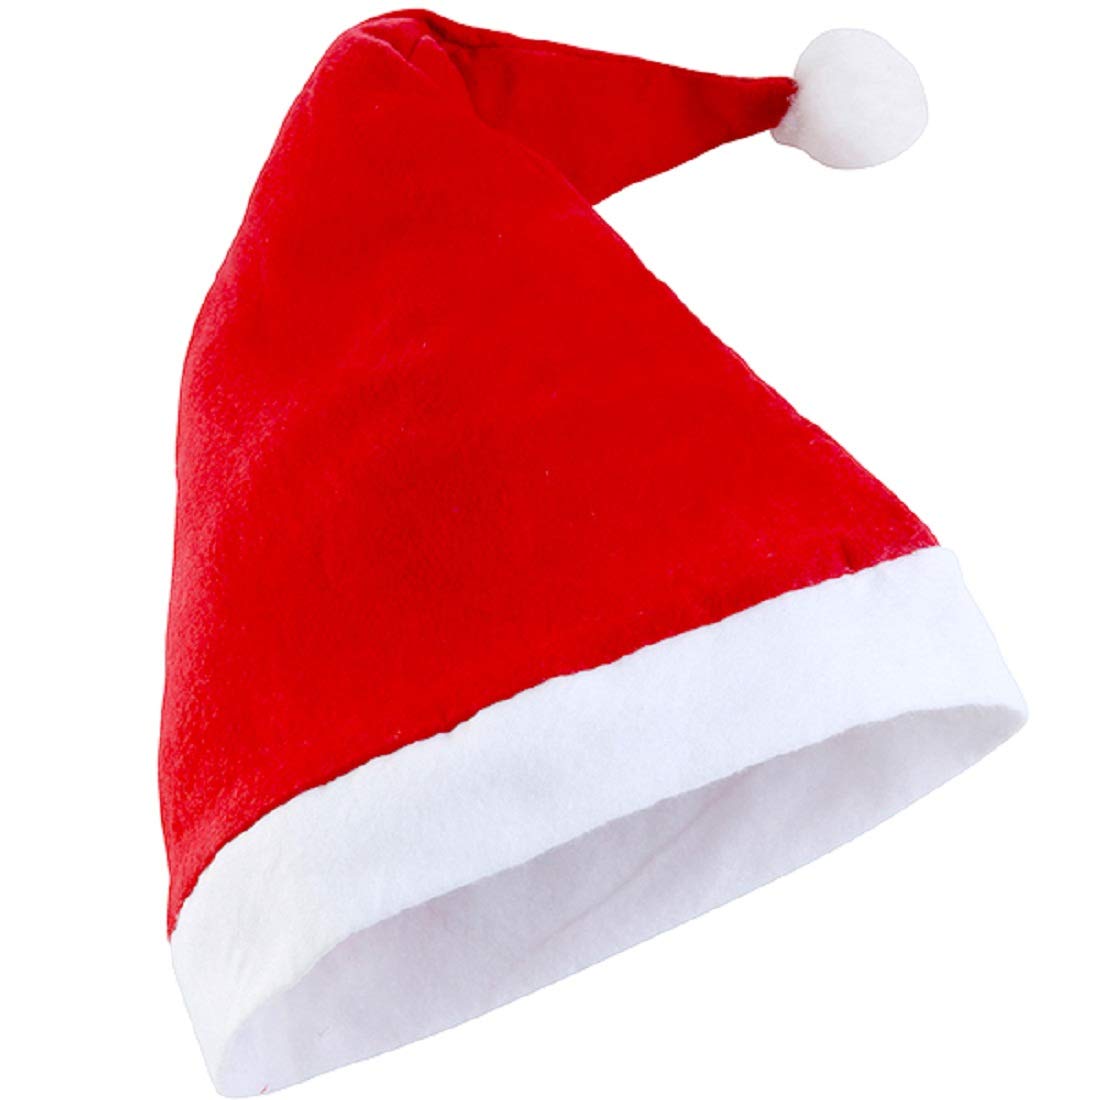 eCraftIndia Red and White Merry Christmas Hats, Santa Claus Caps for kids and Adults - Free Size XMAS Caps, Santa Claus Hats for Christmas, New Year, Festive Holiday Party (Set of 3) 2